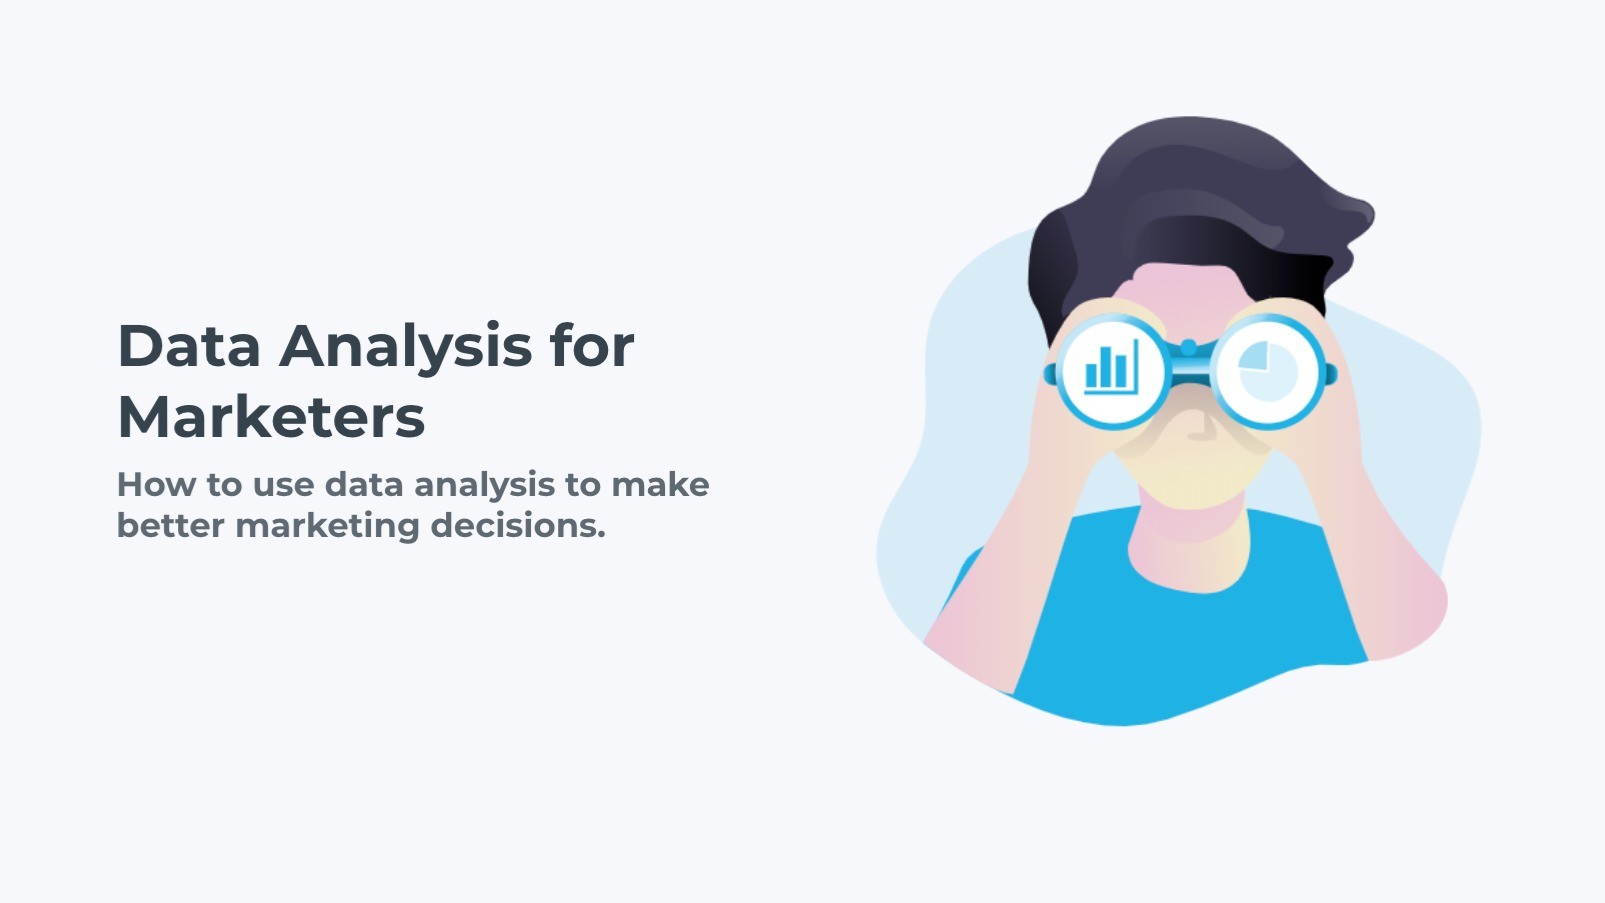 Data Analysis for Marketers